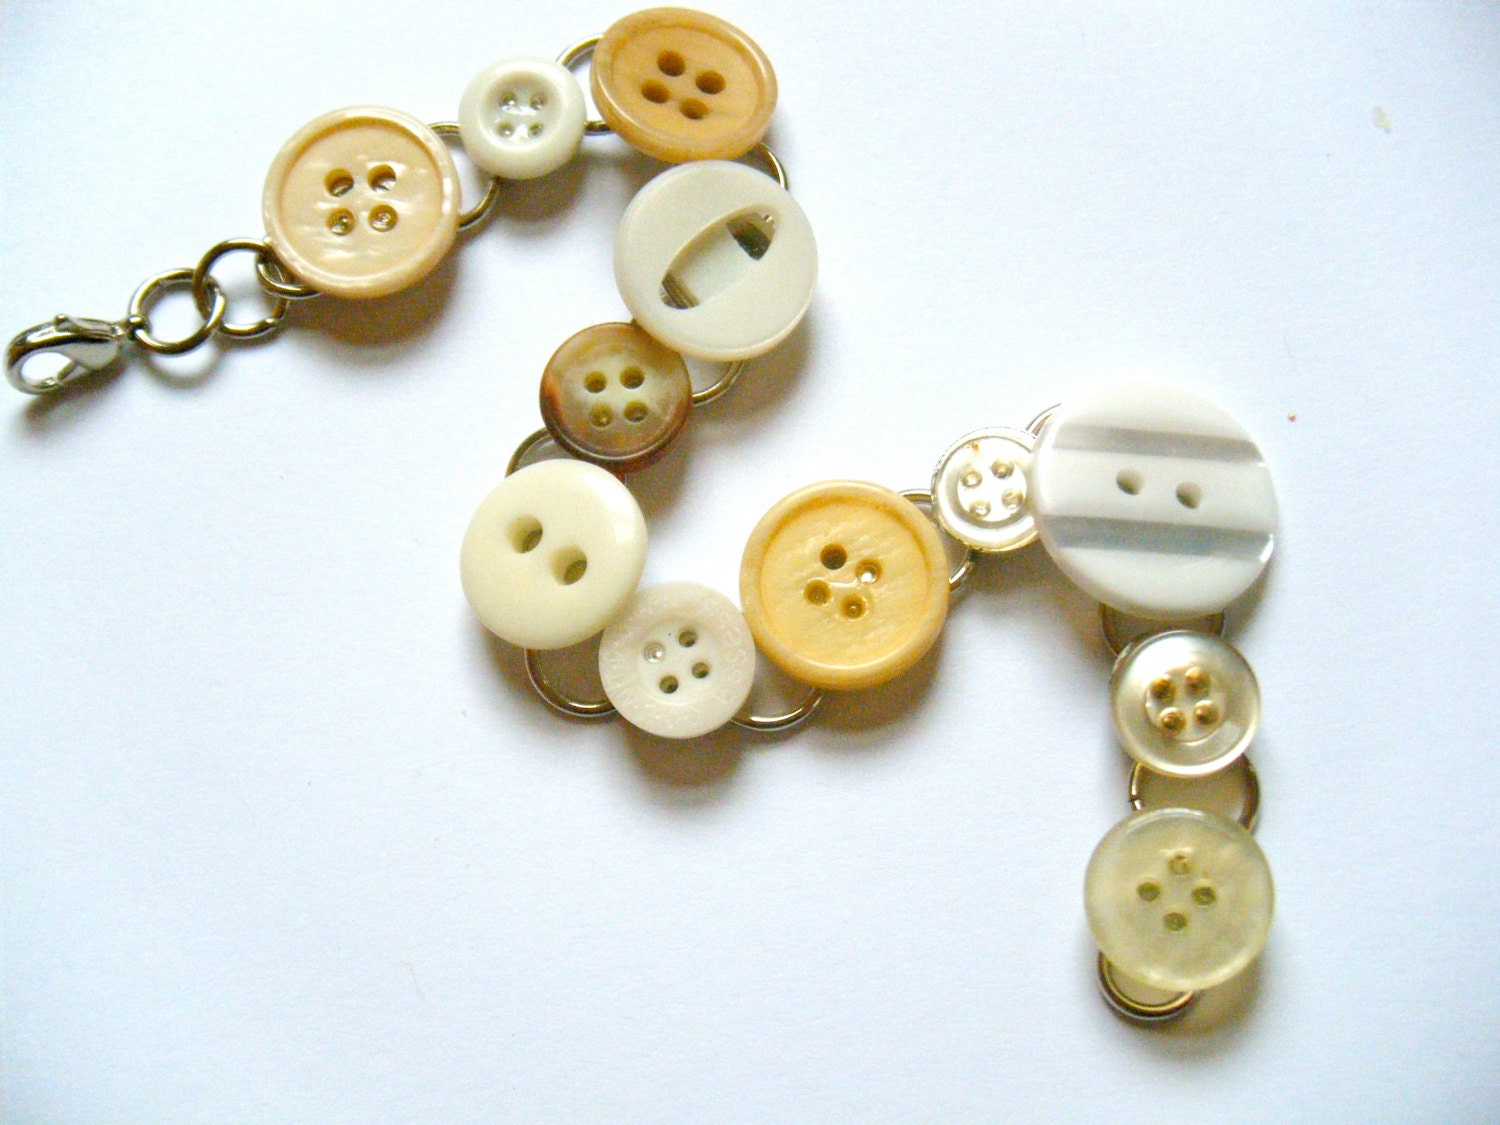 OOAK Vintage Buttons Metal Bracelet Recycled Material Silver Beige Sewing Upcycled Repurposed Funky Seamstress Circle Mixed Media Jewelry